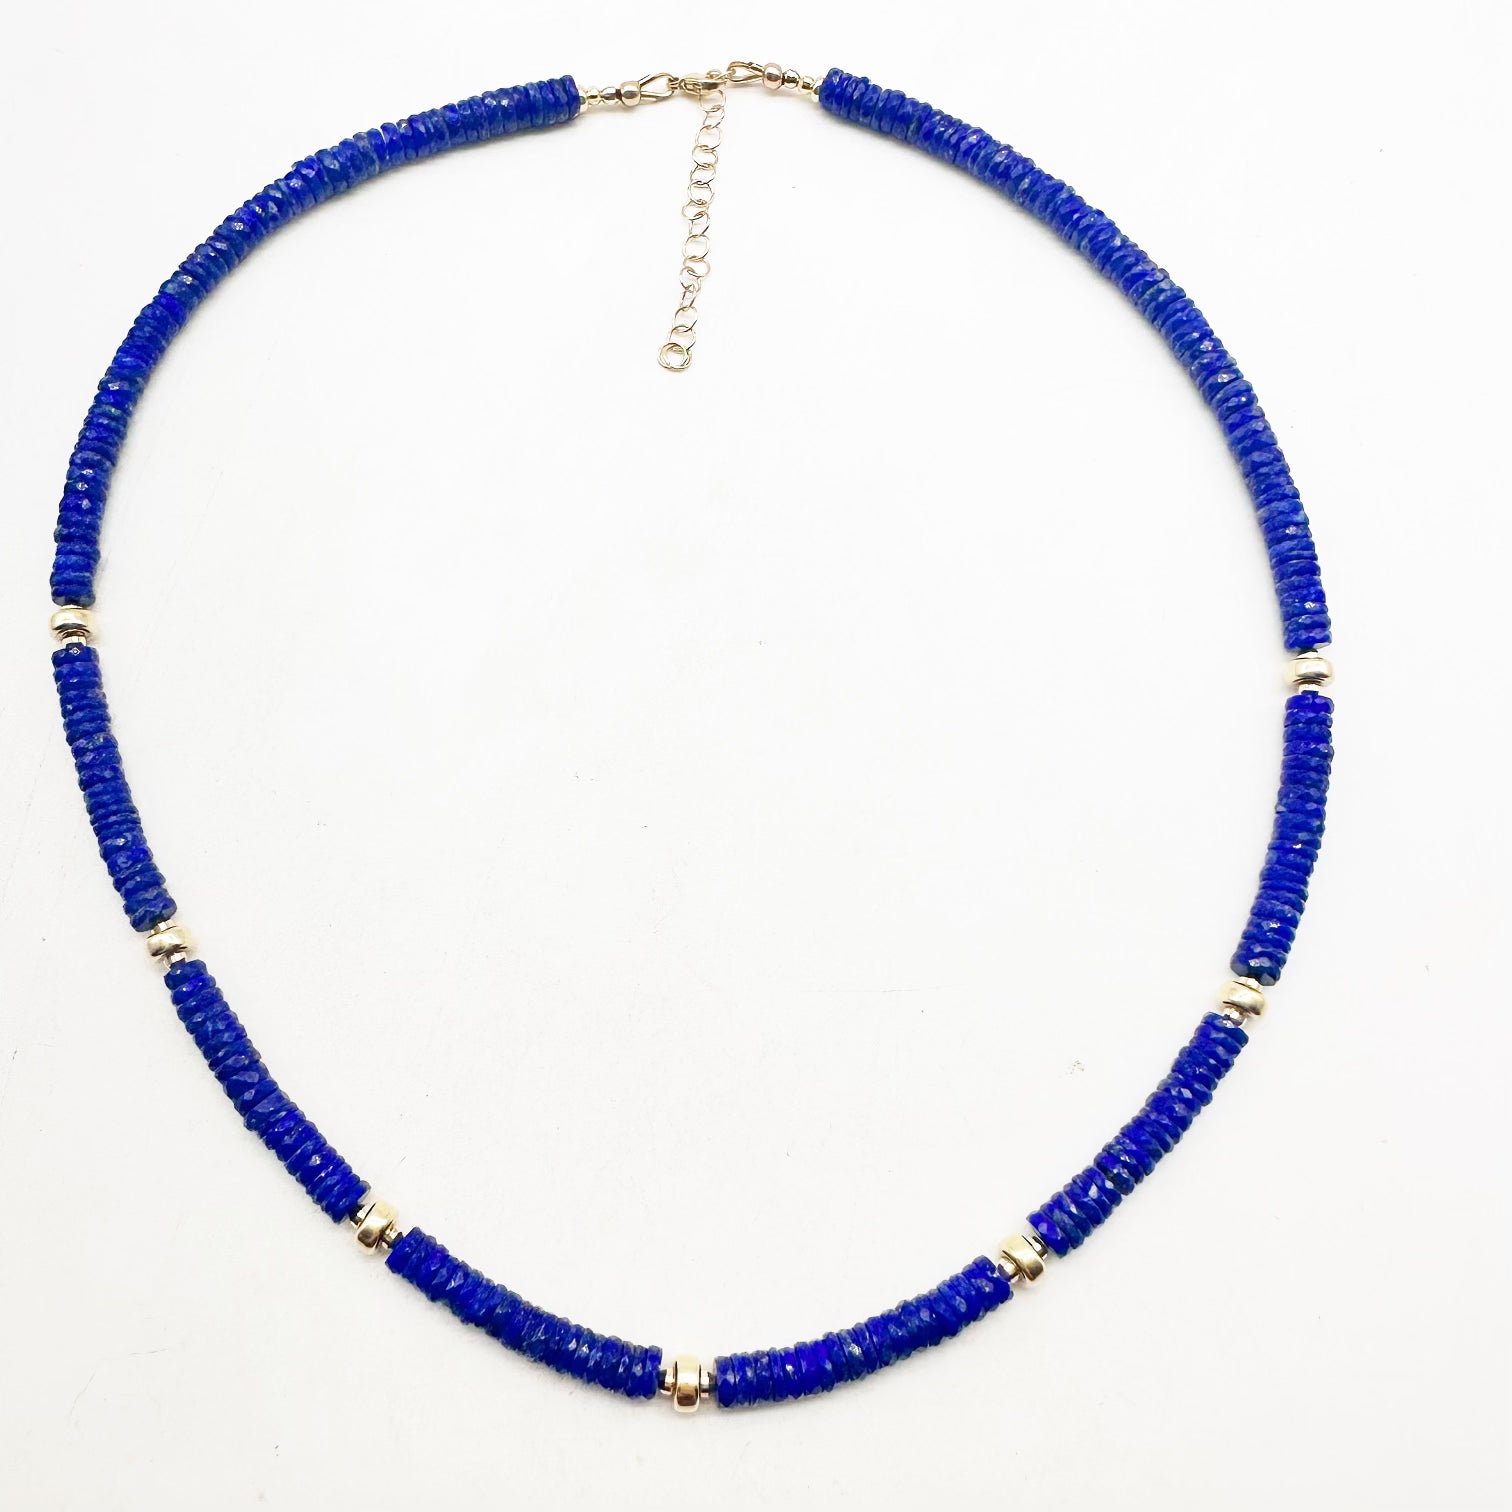 5MM LAPIS NECKLACE WITH 14K GOLD